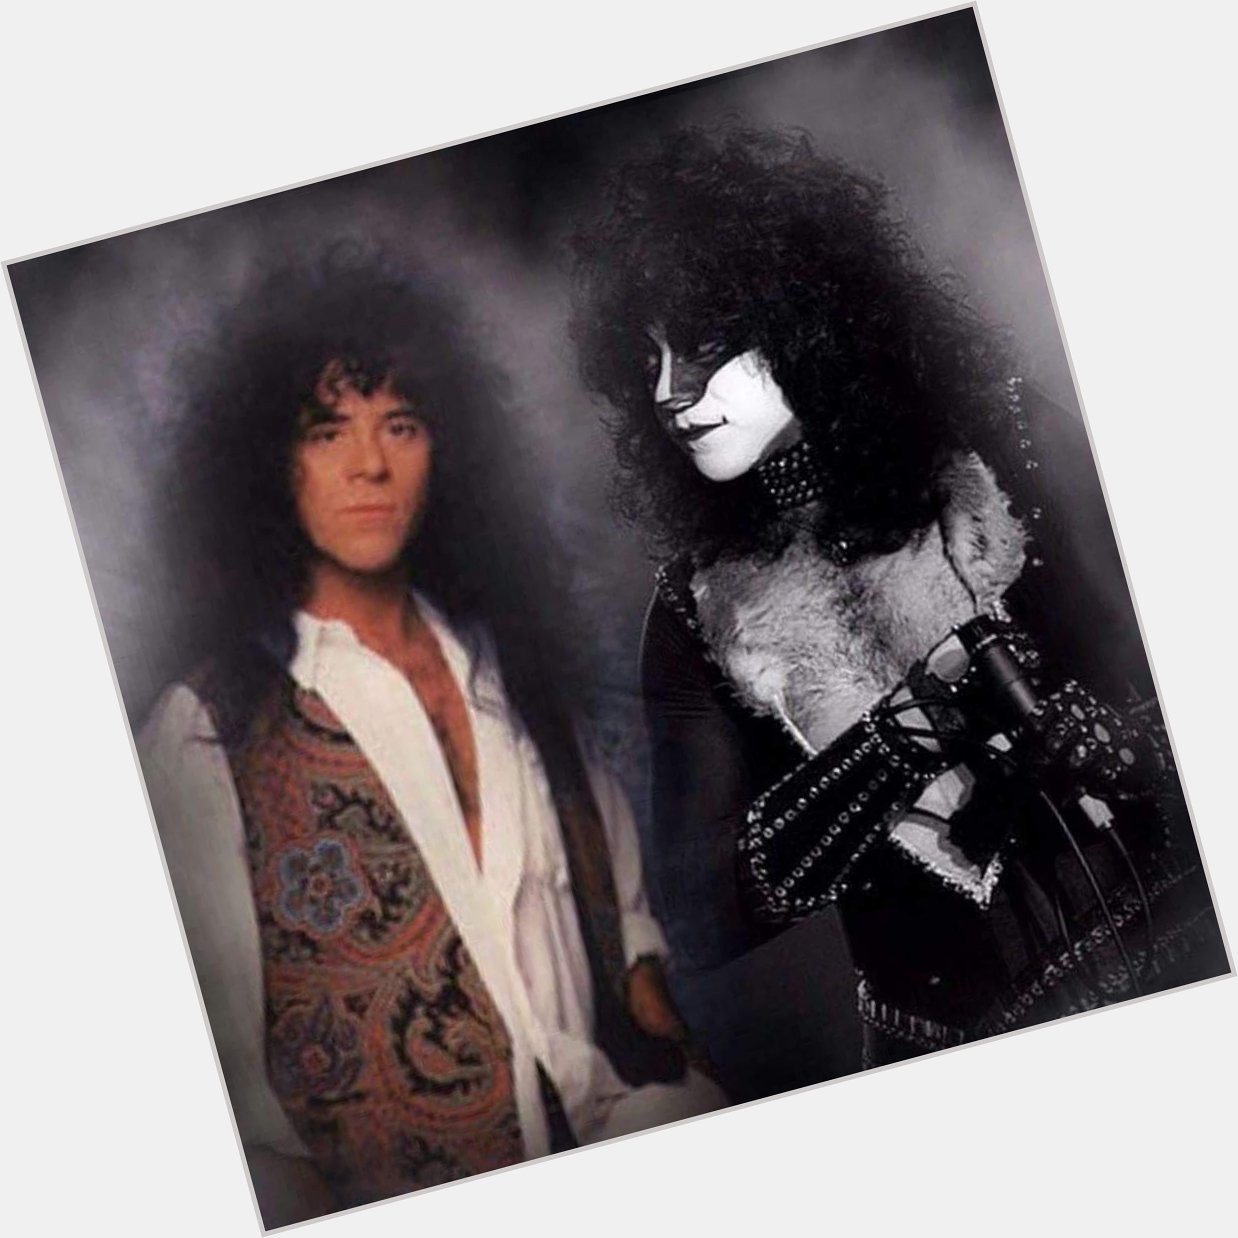 Happy birthday to the late, great Eric Carr. 